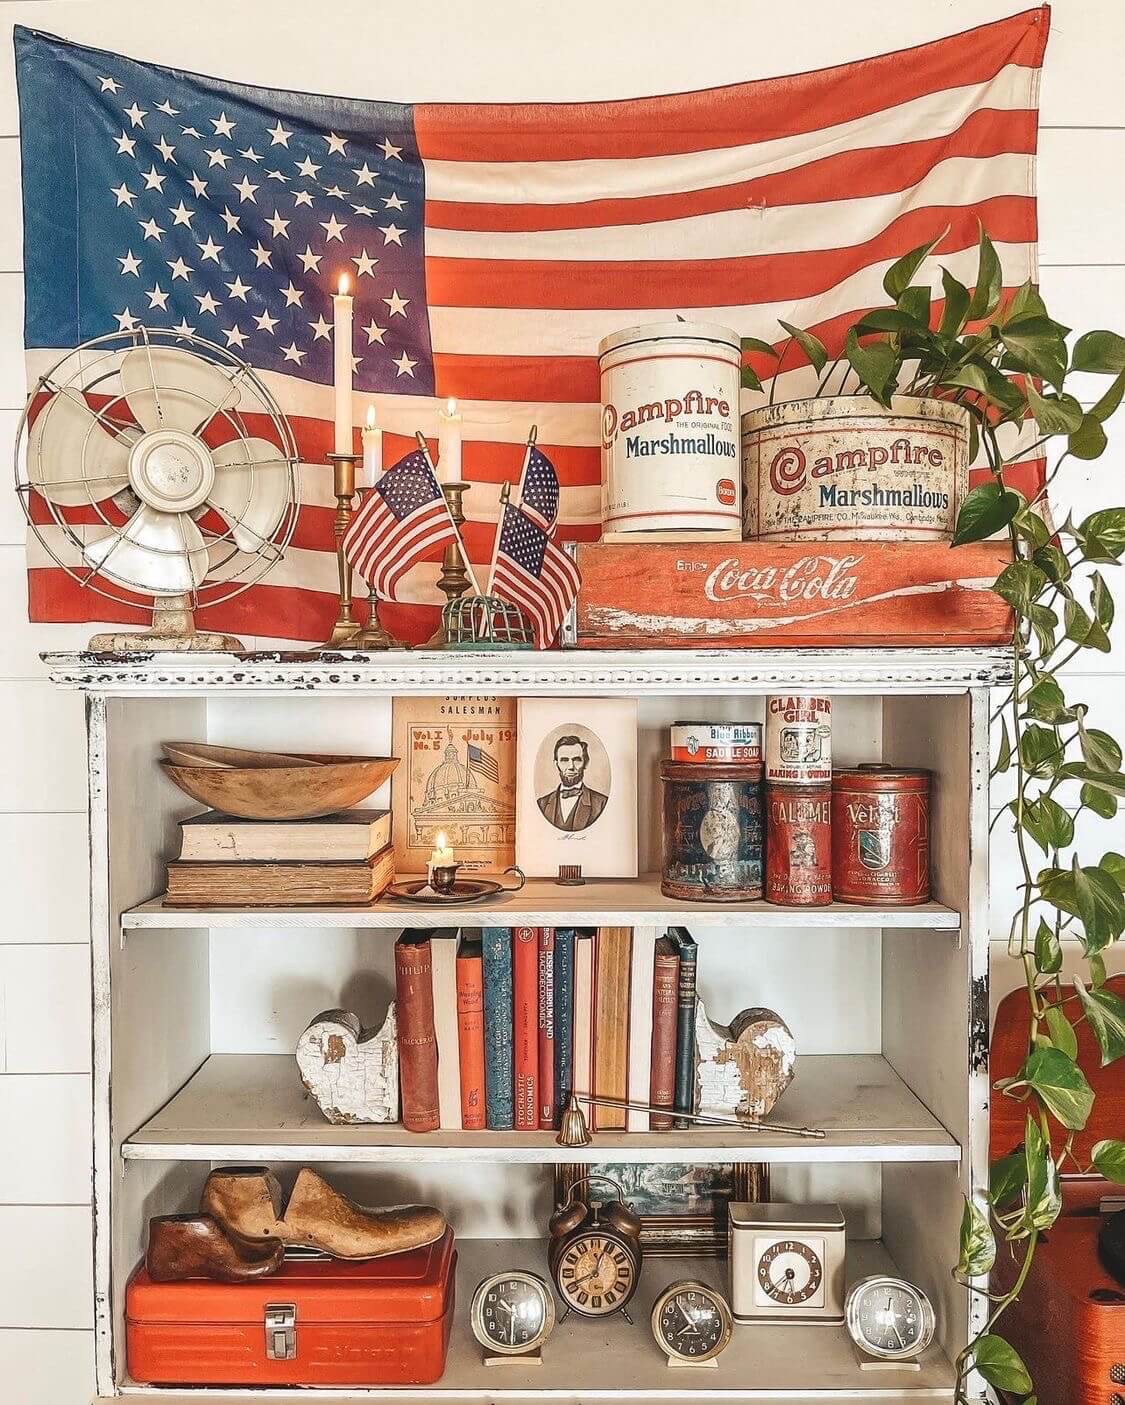 A distressed white shelf is dressed with various antiques including red and blue vintage books, chippy architectural pieces, worn vintage cans, a vintage fan, a black and white portrait of Abraham Lincoln. The top shelf holds a vintage fan, brass candle sticks, small flags, a coca cola wood crate in front a vintage US flag.